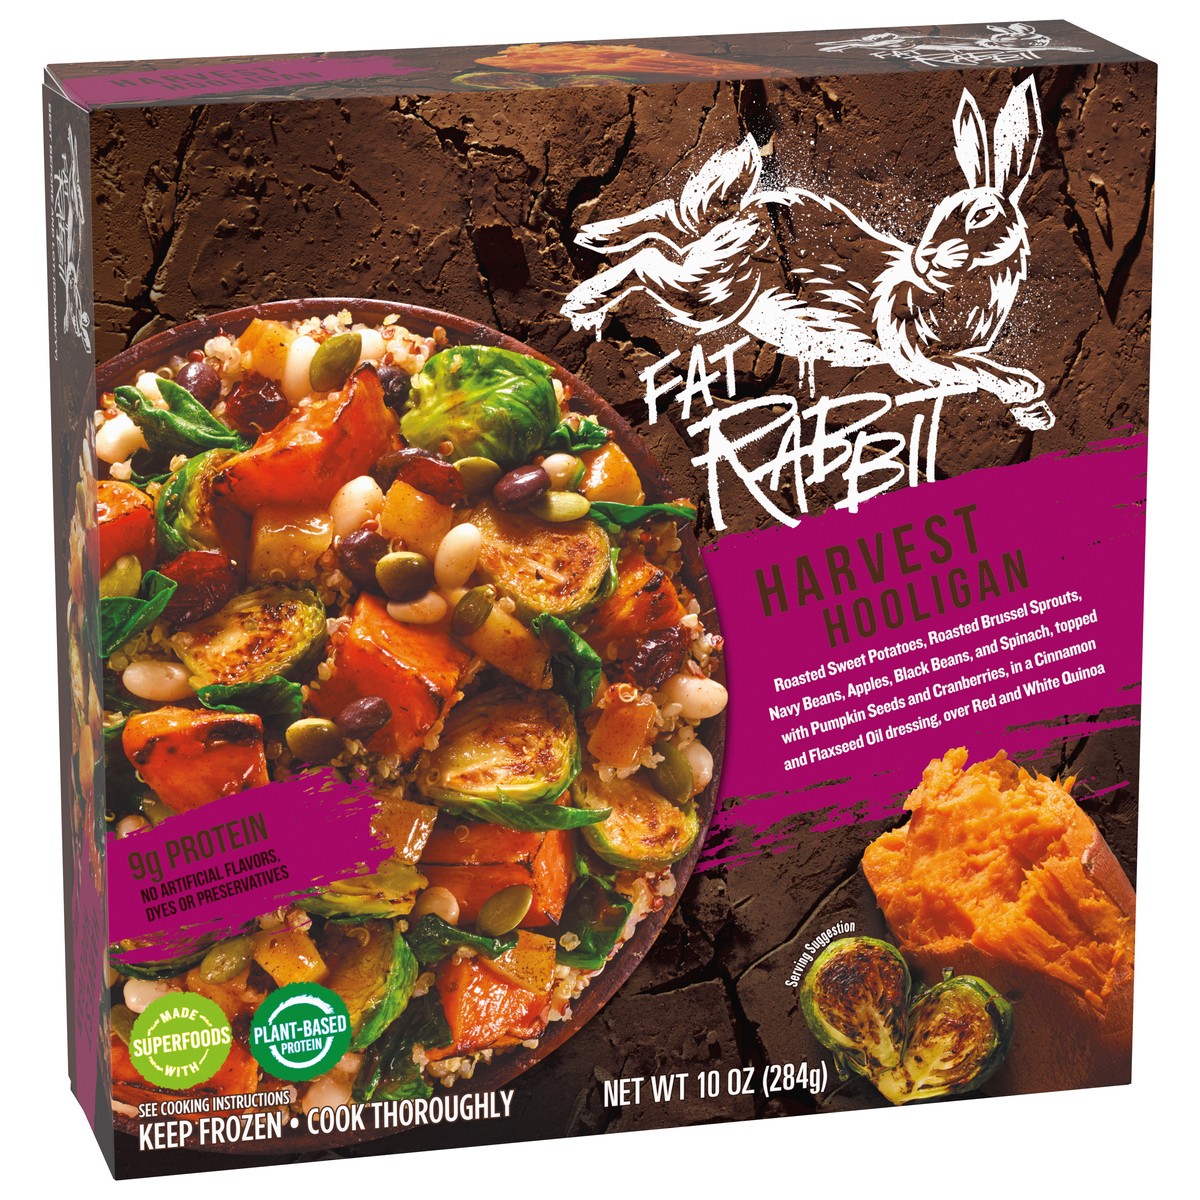 slide 3 of 13, Fat Rabbit Harvest Hooligan with Roasted Vegetables, Fruit & Pumpkin Seeds in Cinnamon & Flaxseed Oil Dressing over Quinoa Frozen Meal, 10 oz Box, 10 oz